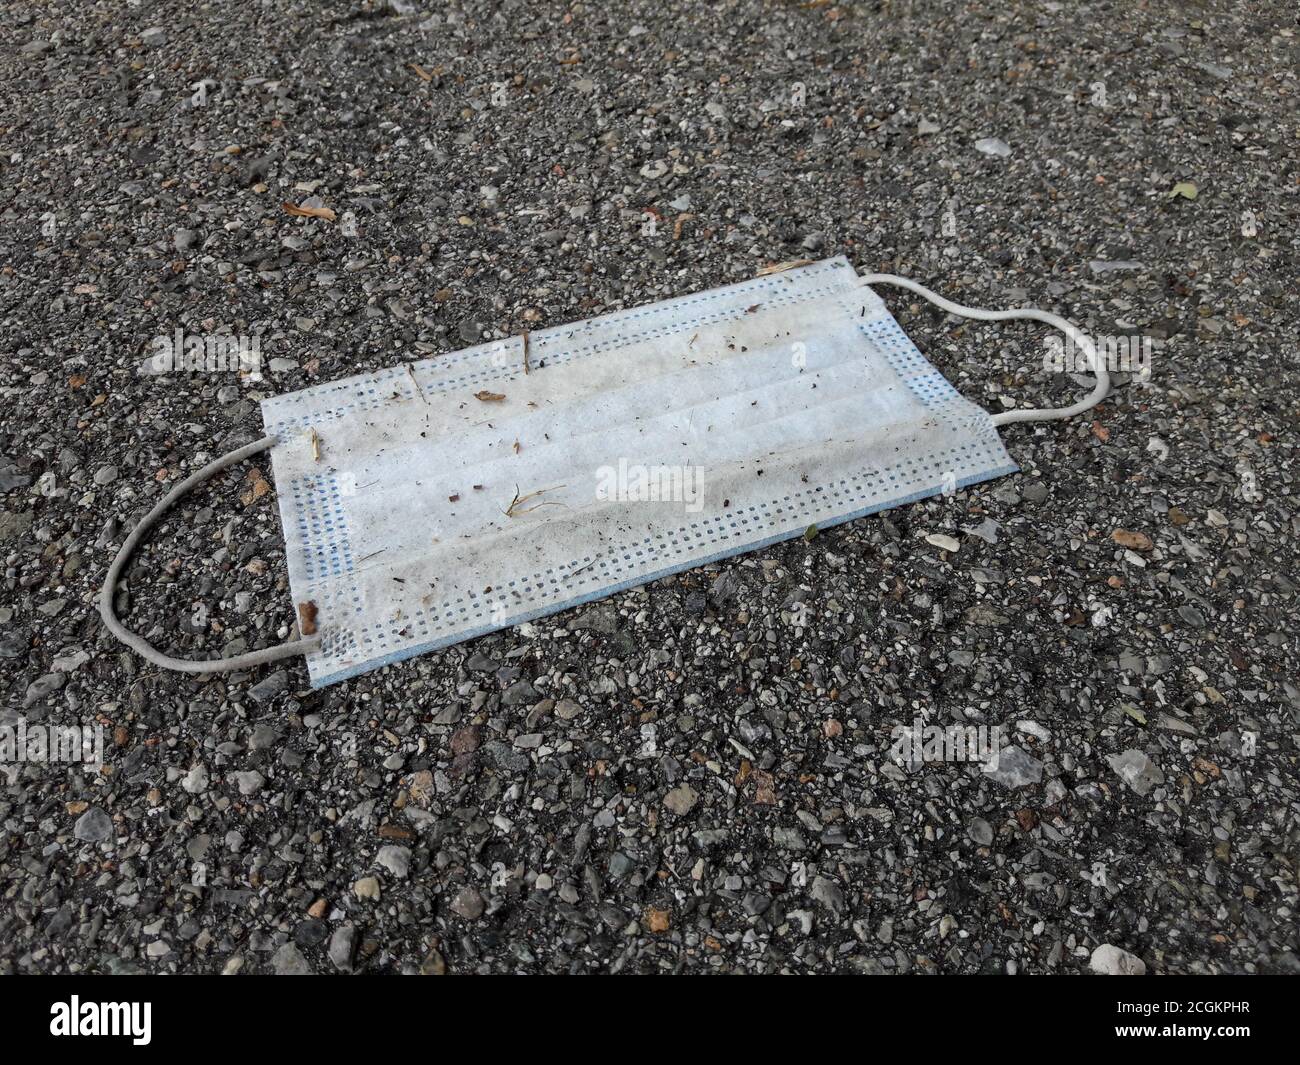 A used surgical mask dumped on a sidewalk in Switzerland. The mask are used to fight the corona virus pandemic Stock Photo